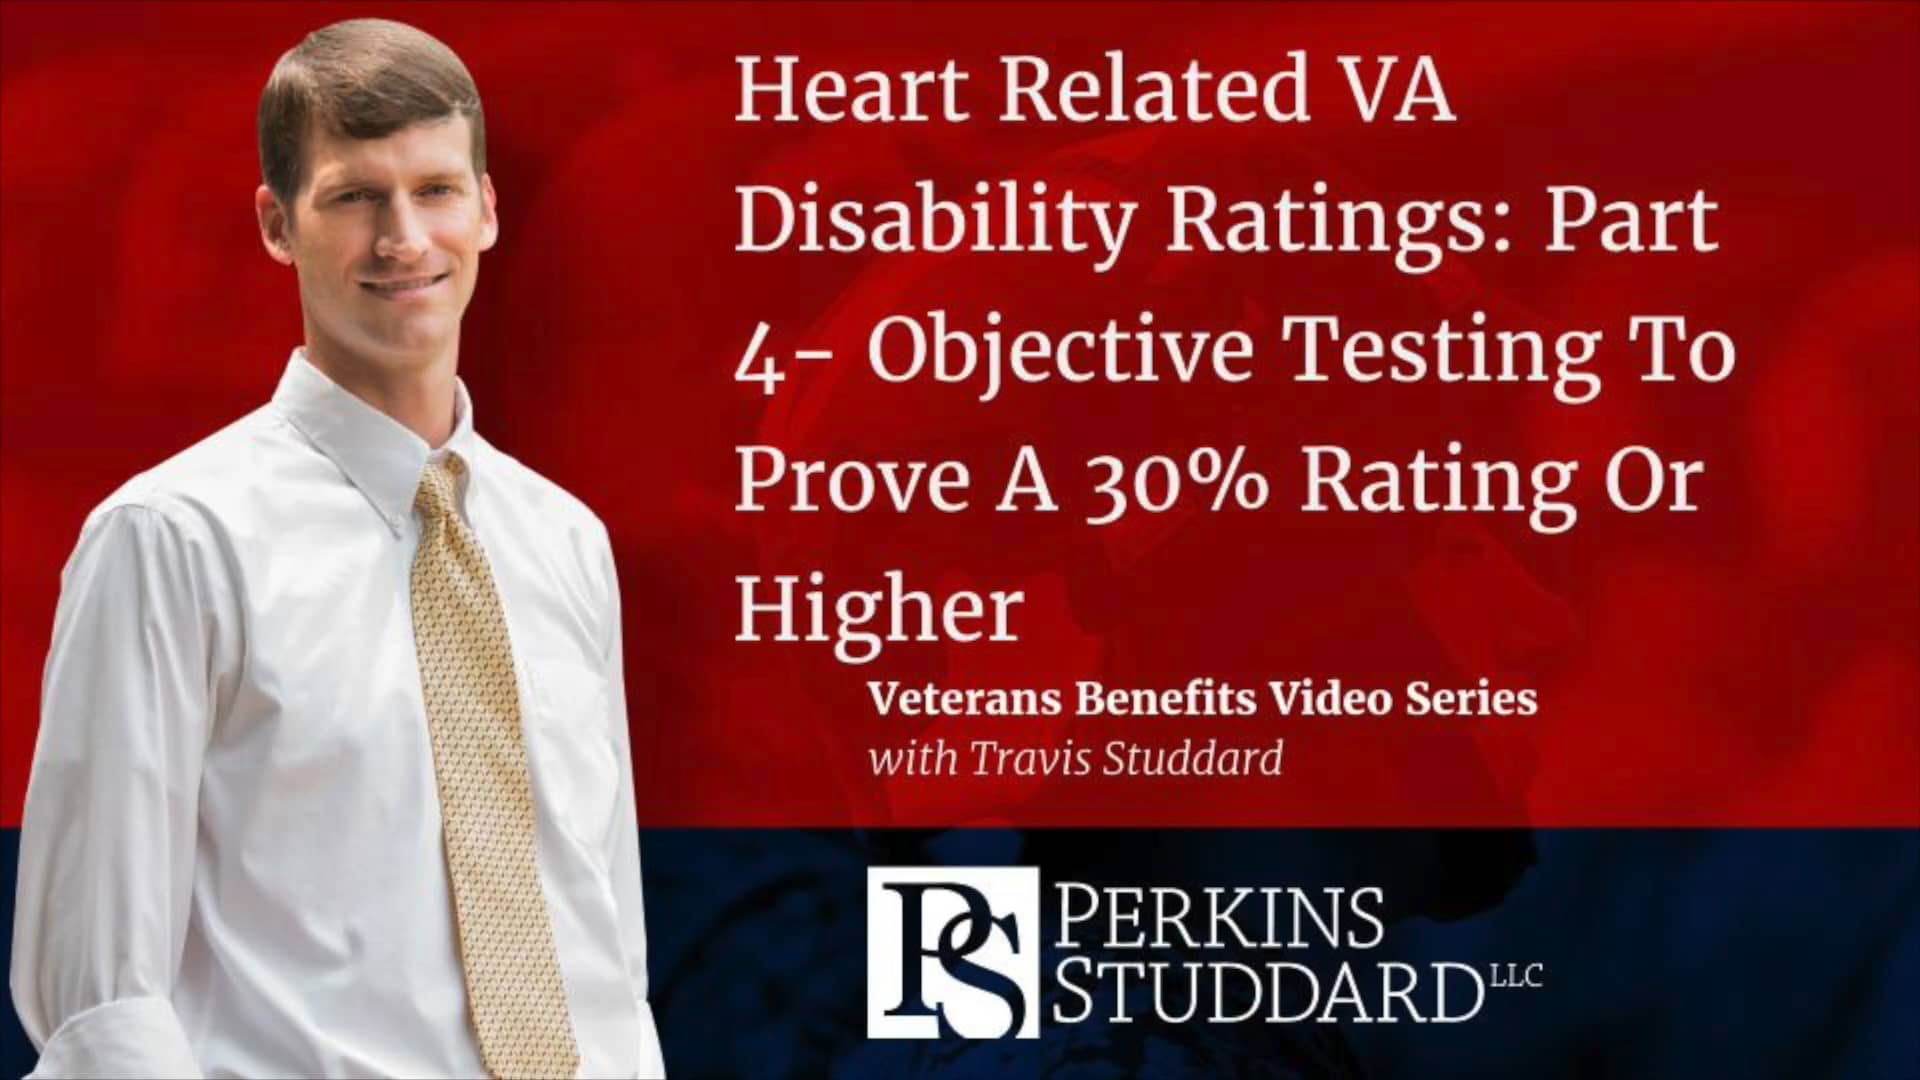 How to Get a VA Heart Disability Rating of 30% or Higher ...